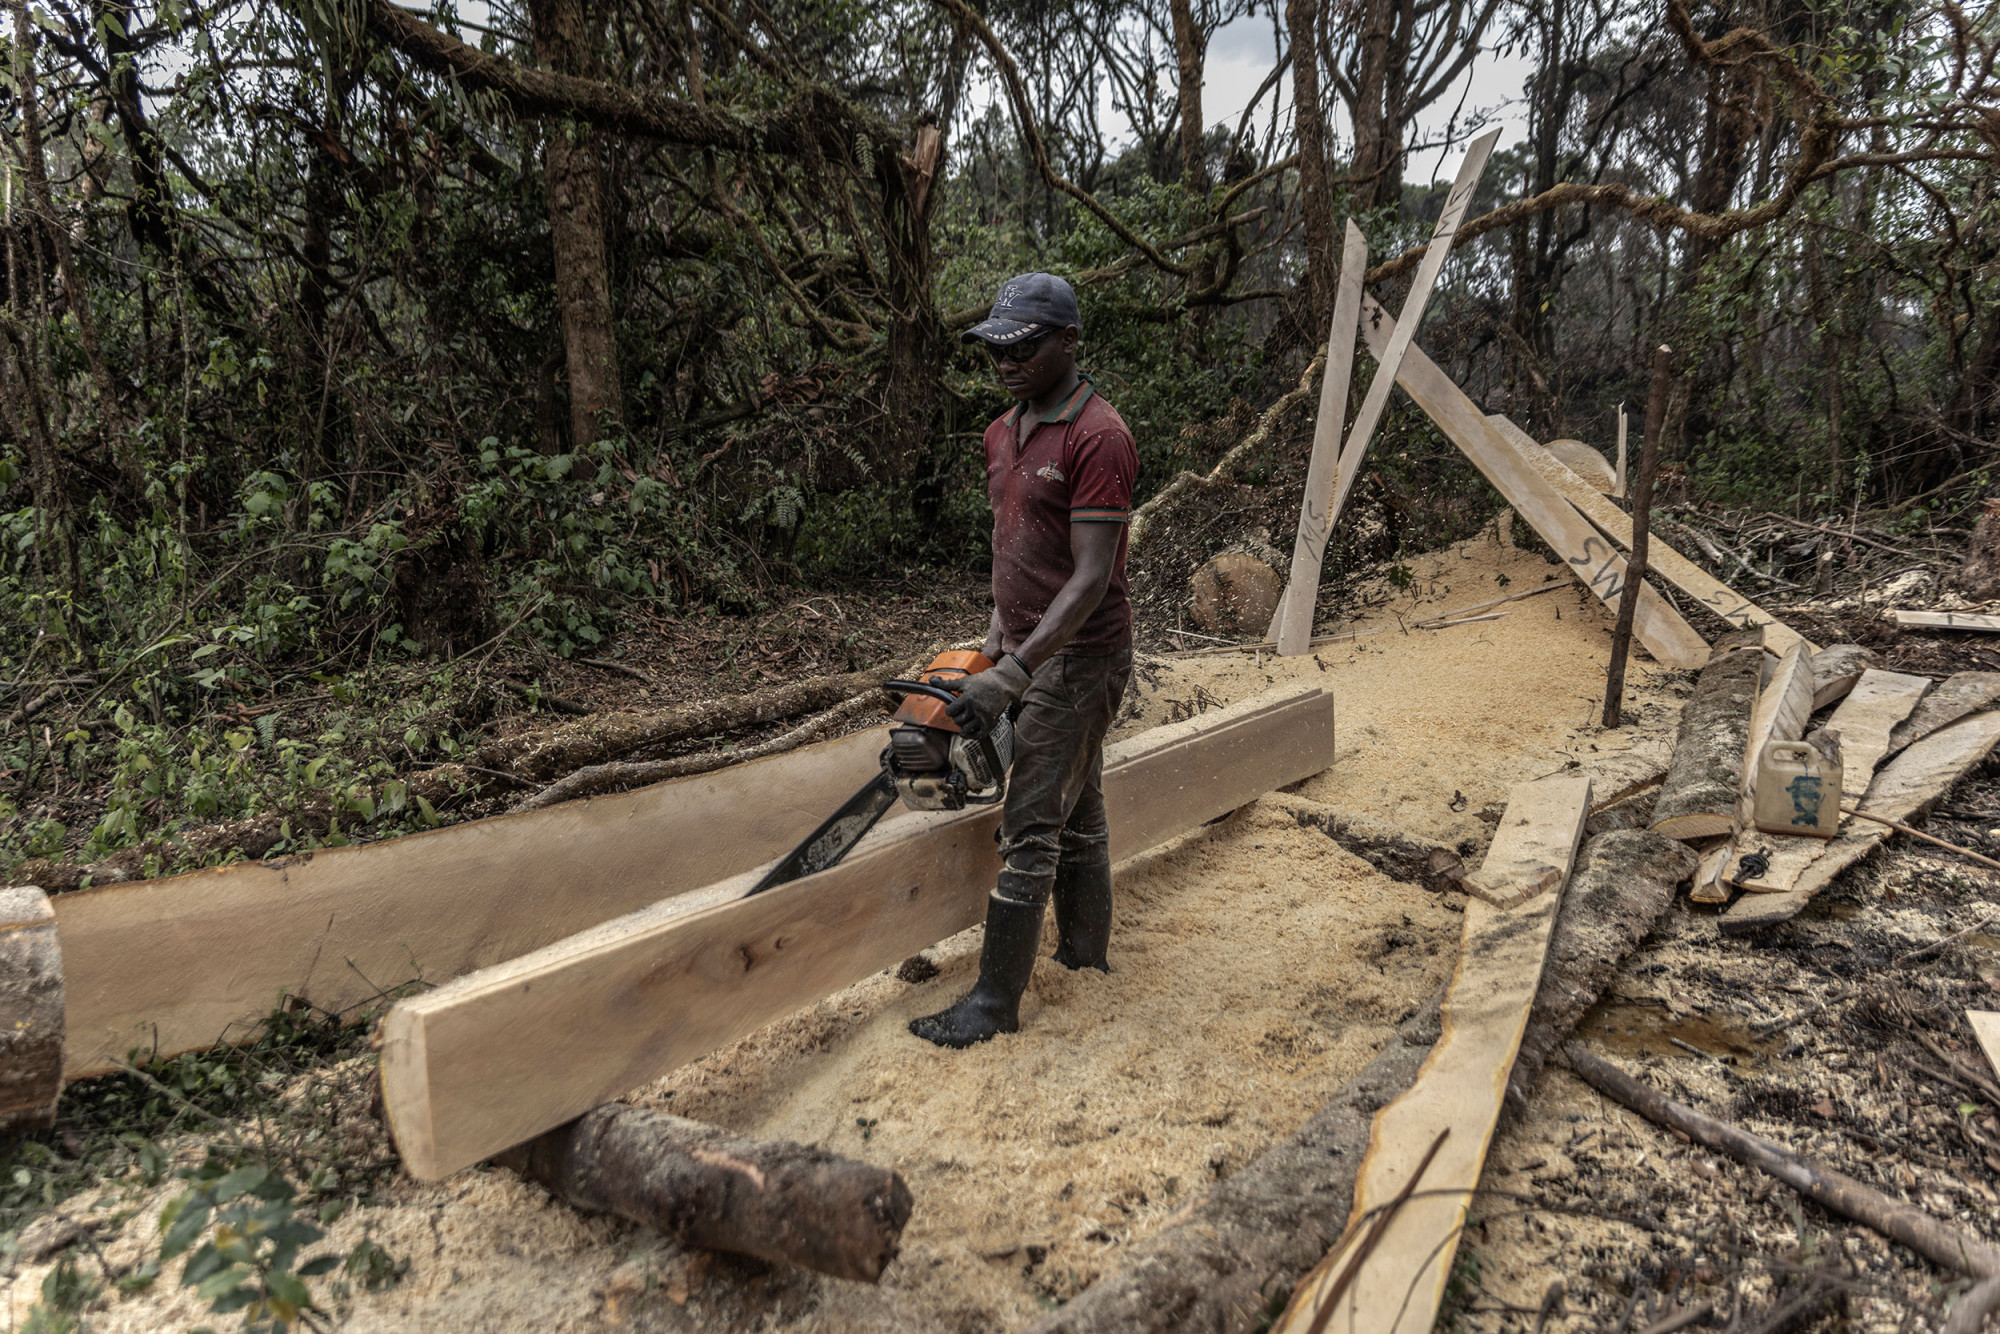 Bugamanda, Kahuzi-Biega National Park, September 03, 2021.  Workers produce boards with an electric machine for the construction of houses. © Guerchom Ndebo for Fondation Carmignac